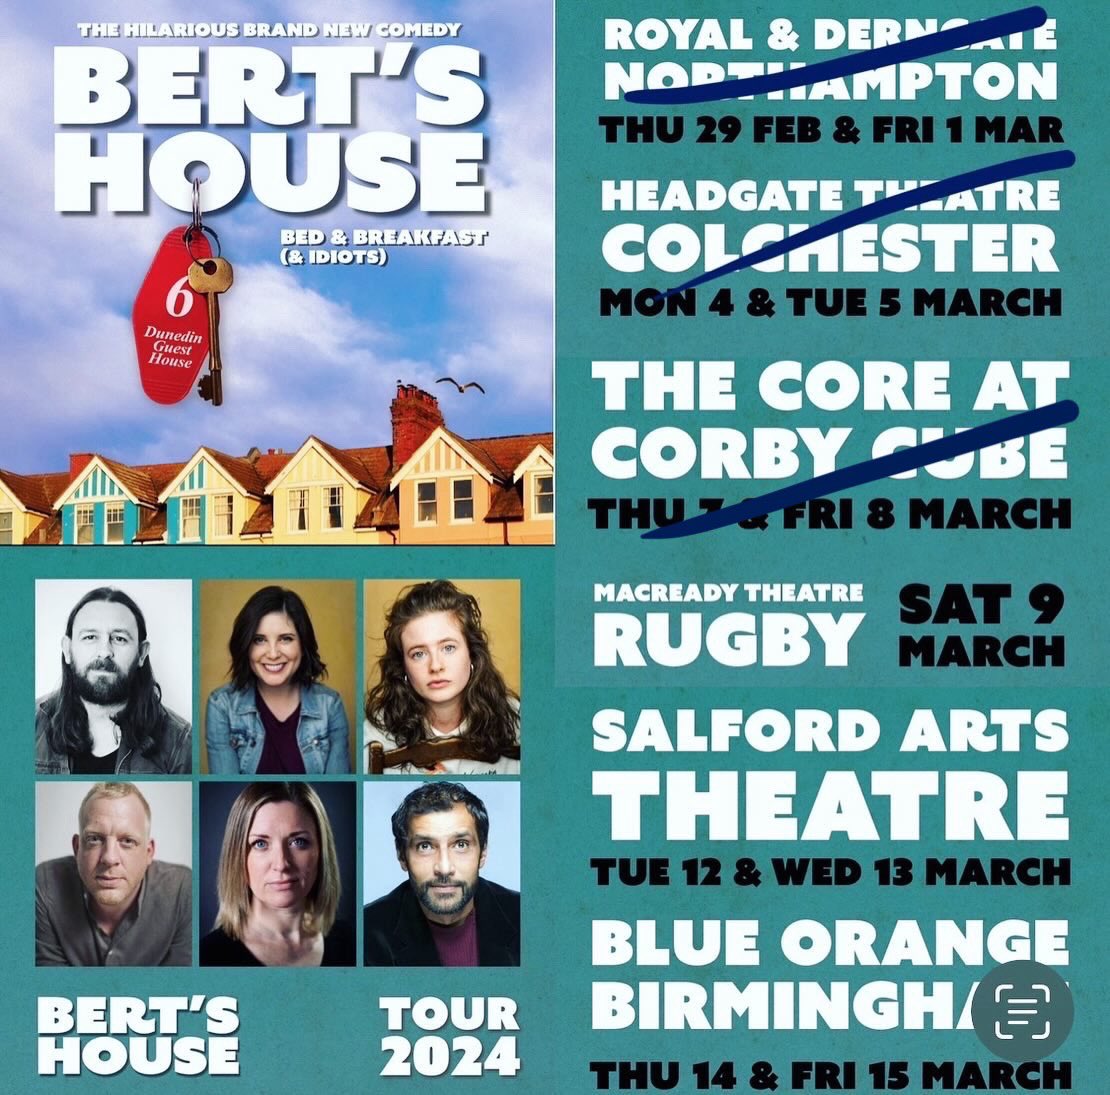 Another venue down. Thank you to everyone that has watched Bert’s House so far… TODAY Rugby! @Macready_Rugby Cannot wait to play here! #comedy #bertshouse #theatre #tour2024 #fun #stage #rugby @Birdstontalent1 @louchawner